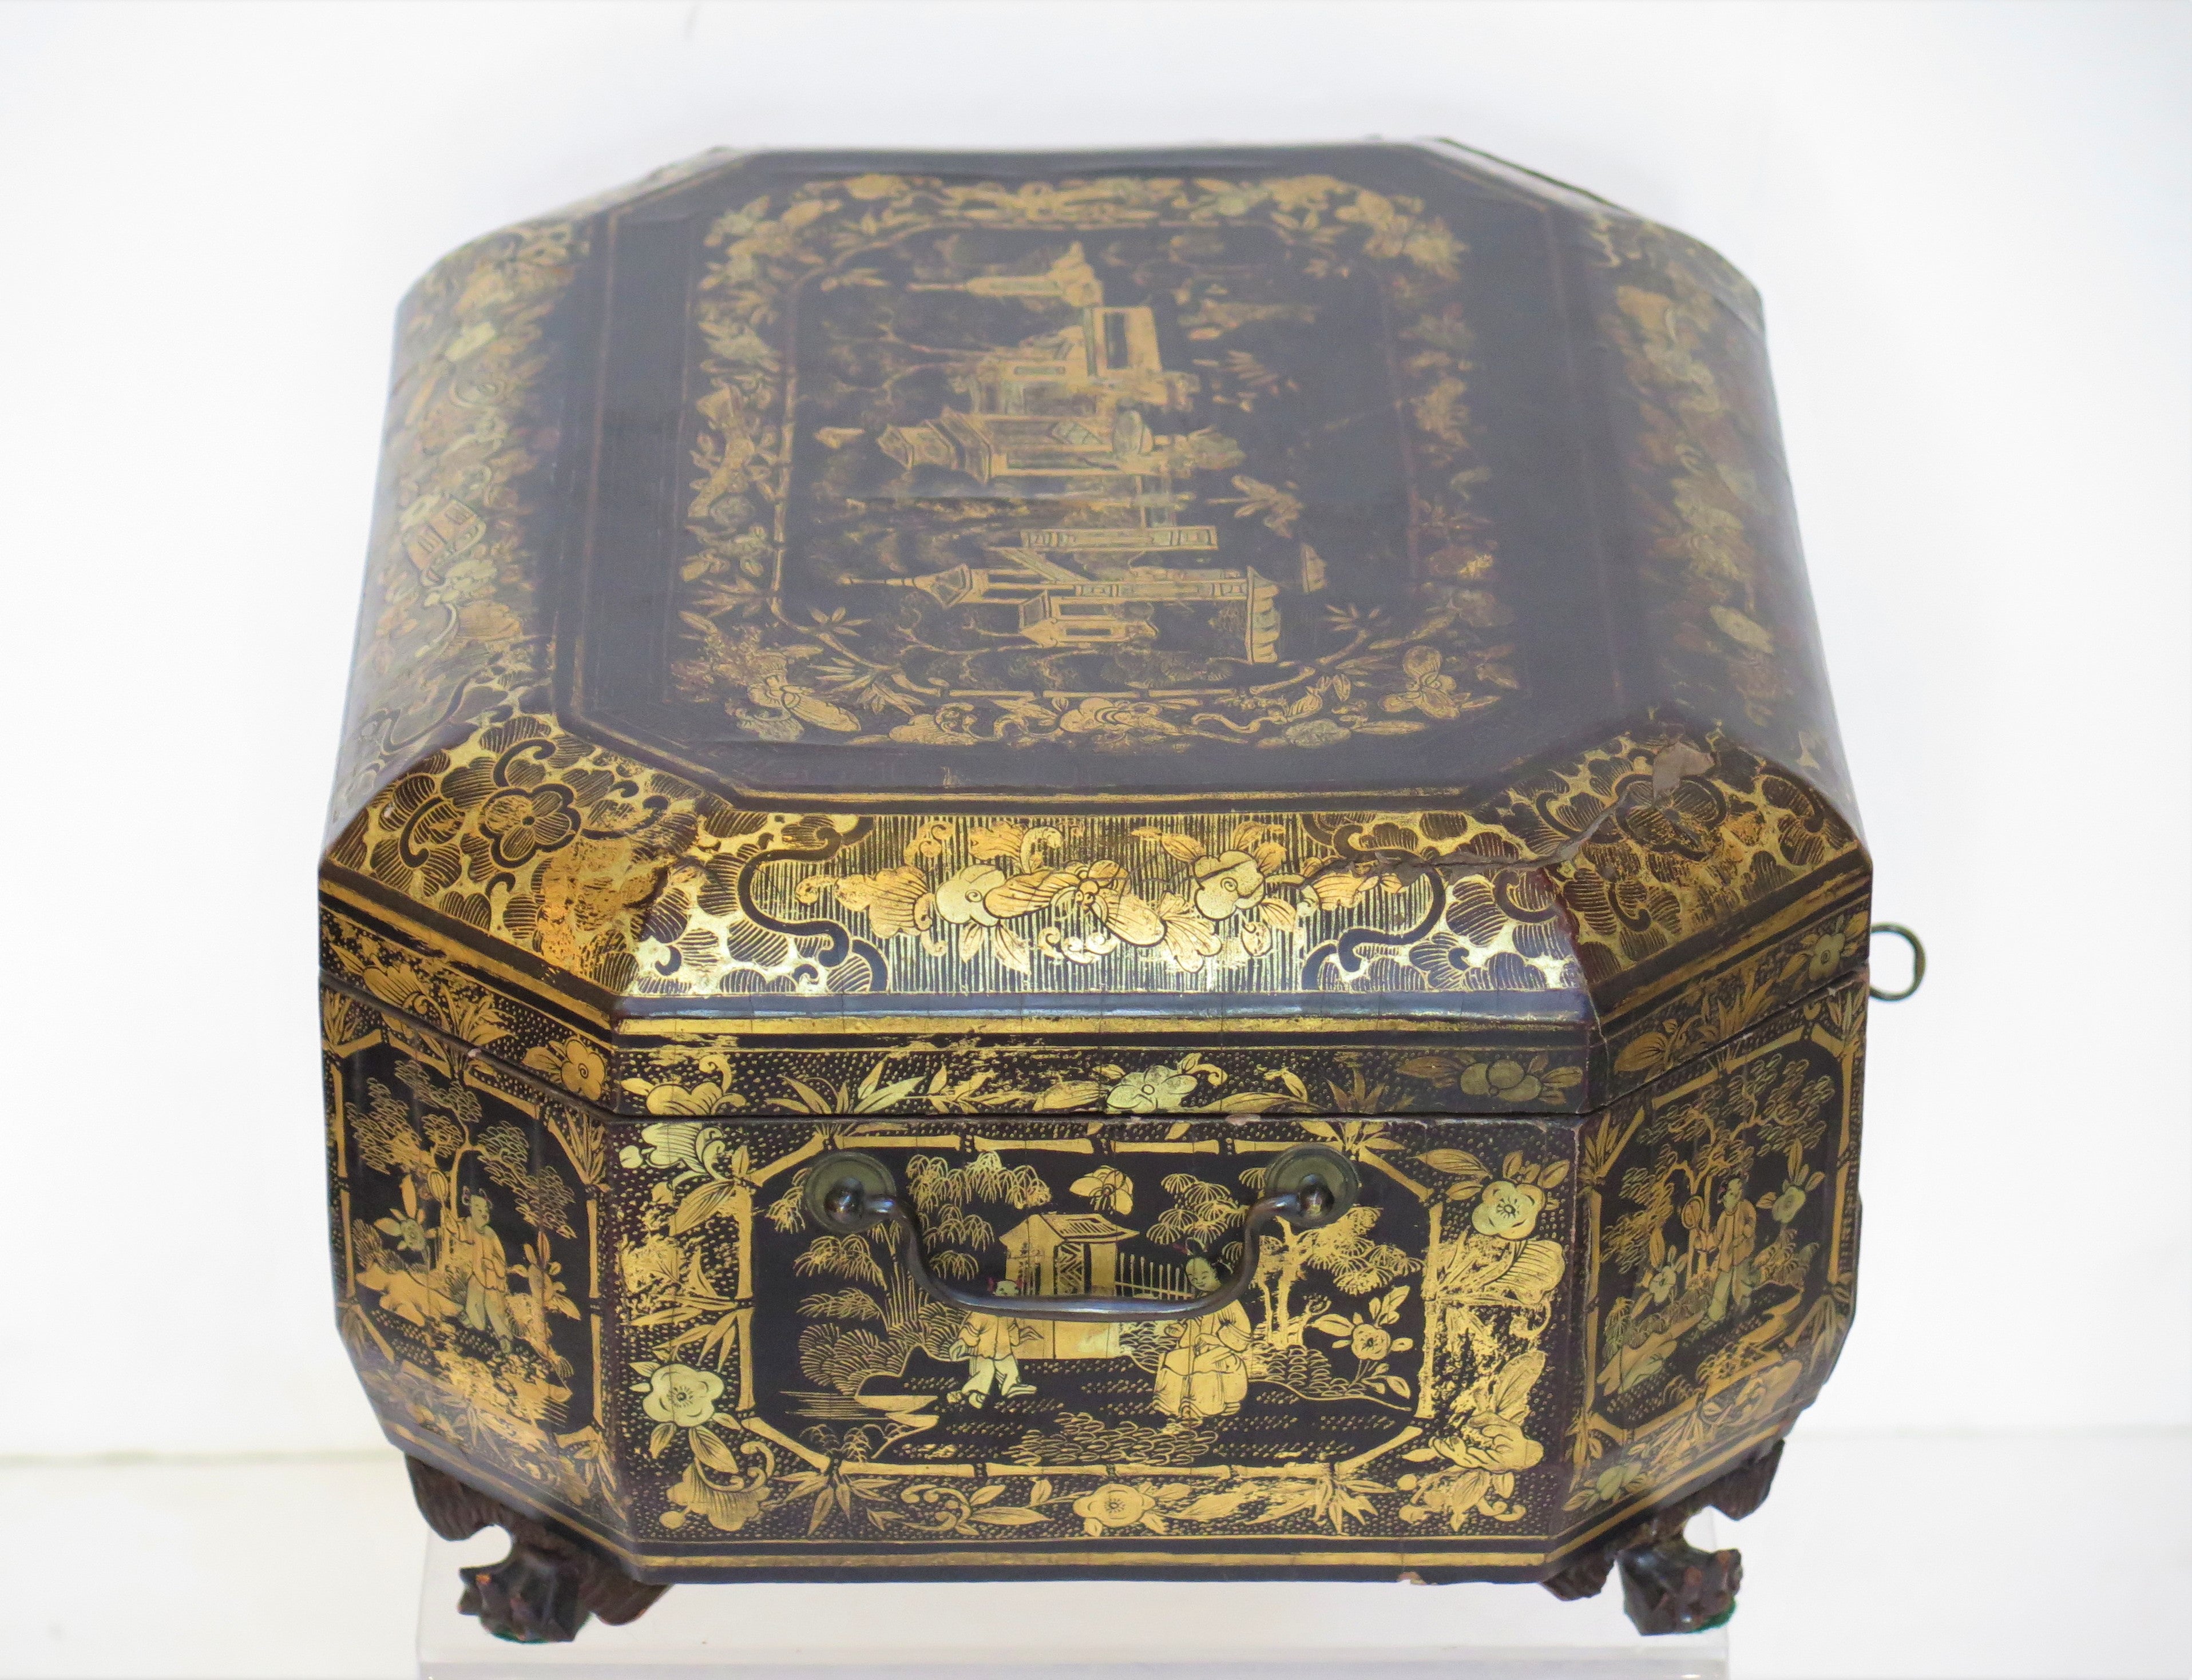 Ealy 19th Century Chinese Export Lacquer Sewing Box